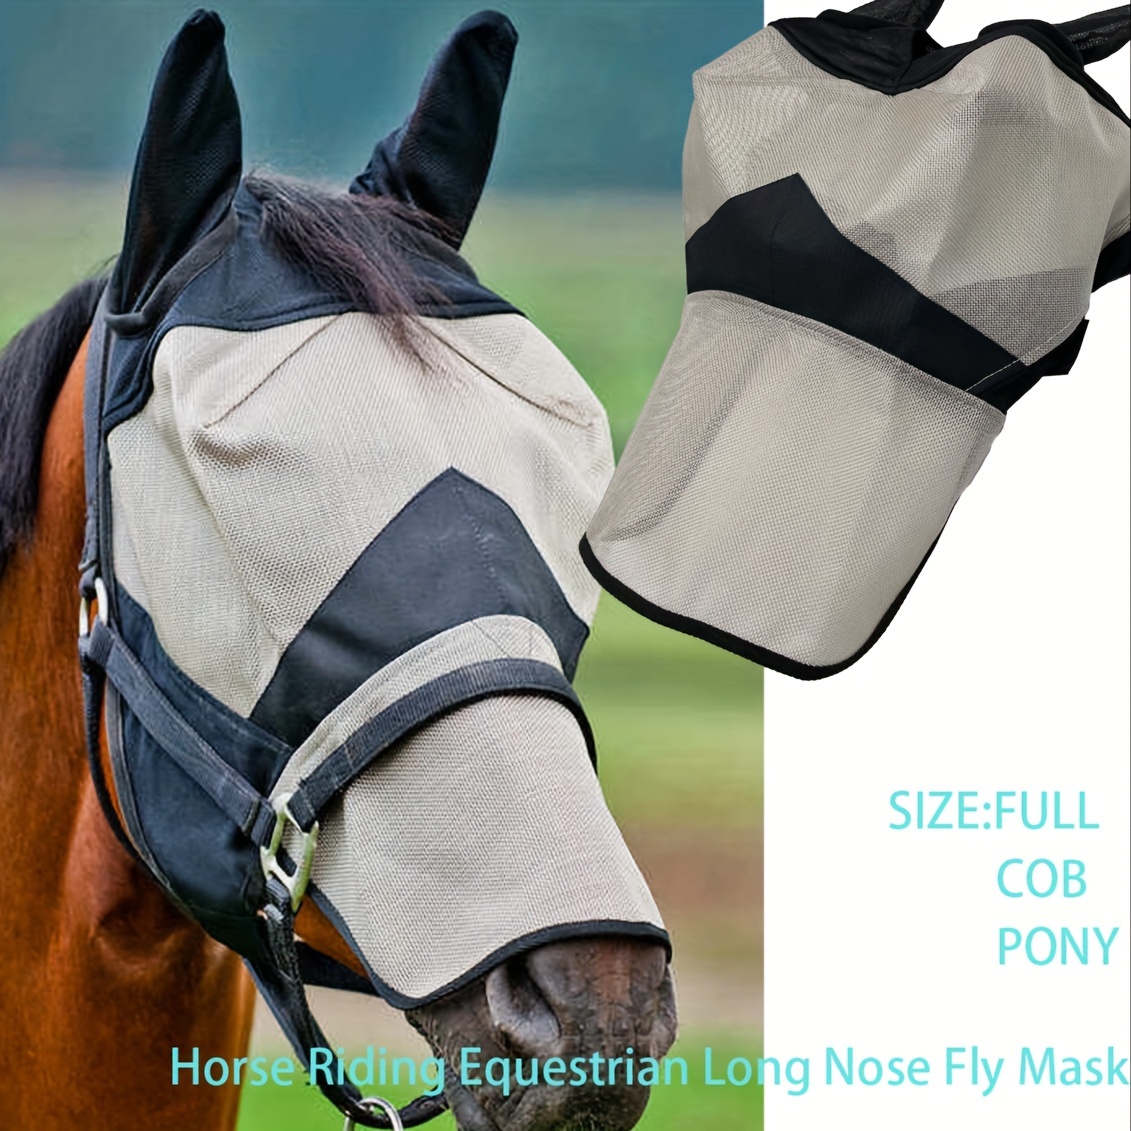 

Joxar Equestrian Long Nose Fly Mask For Horses, Pvc Breathable Mesh Protection With Adjustable Straps - Fly Repellent Horse Mask